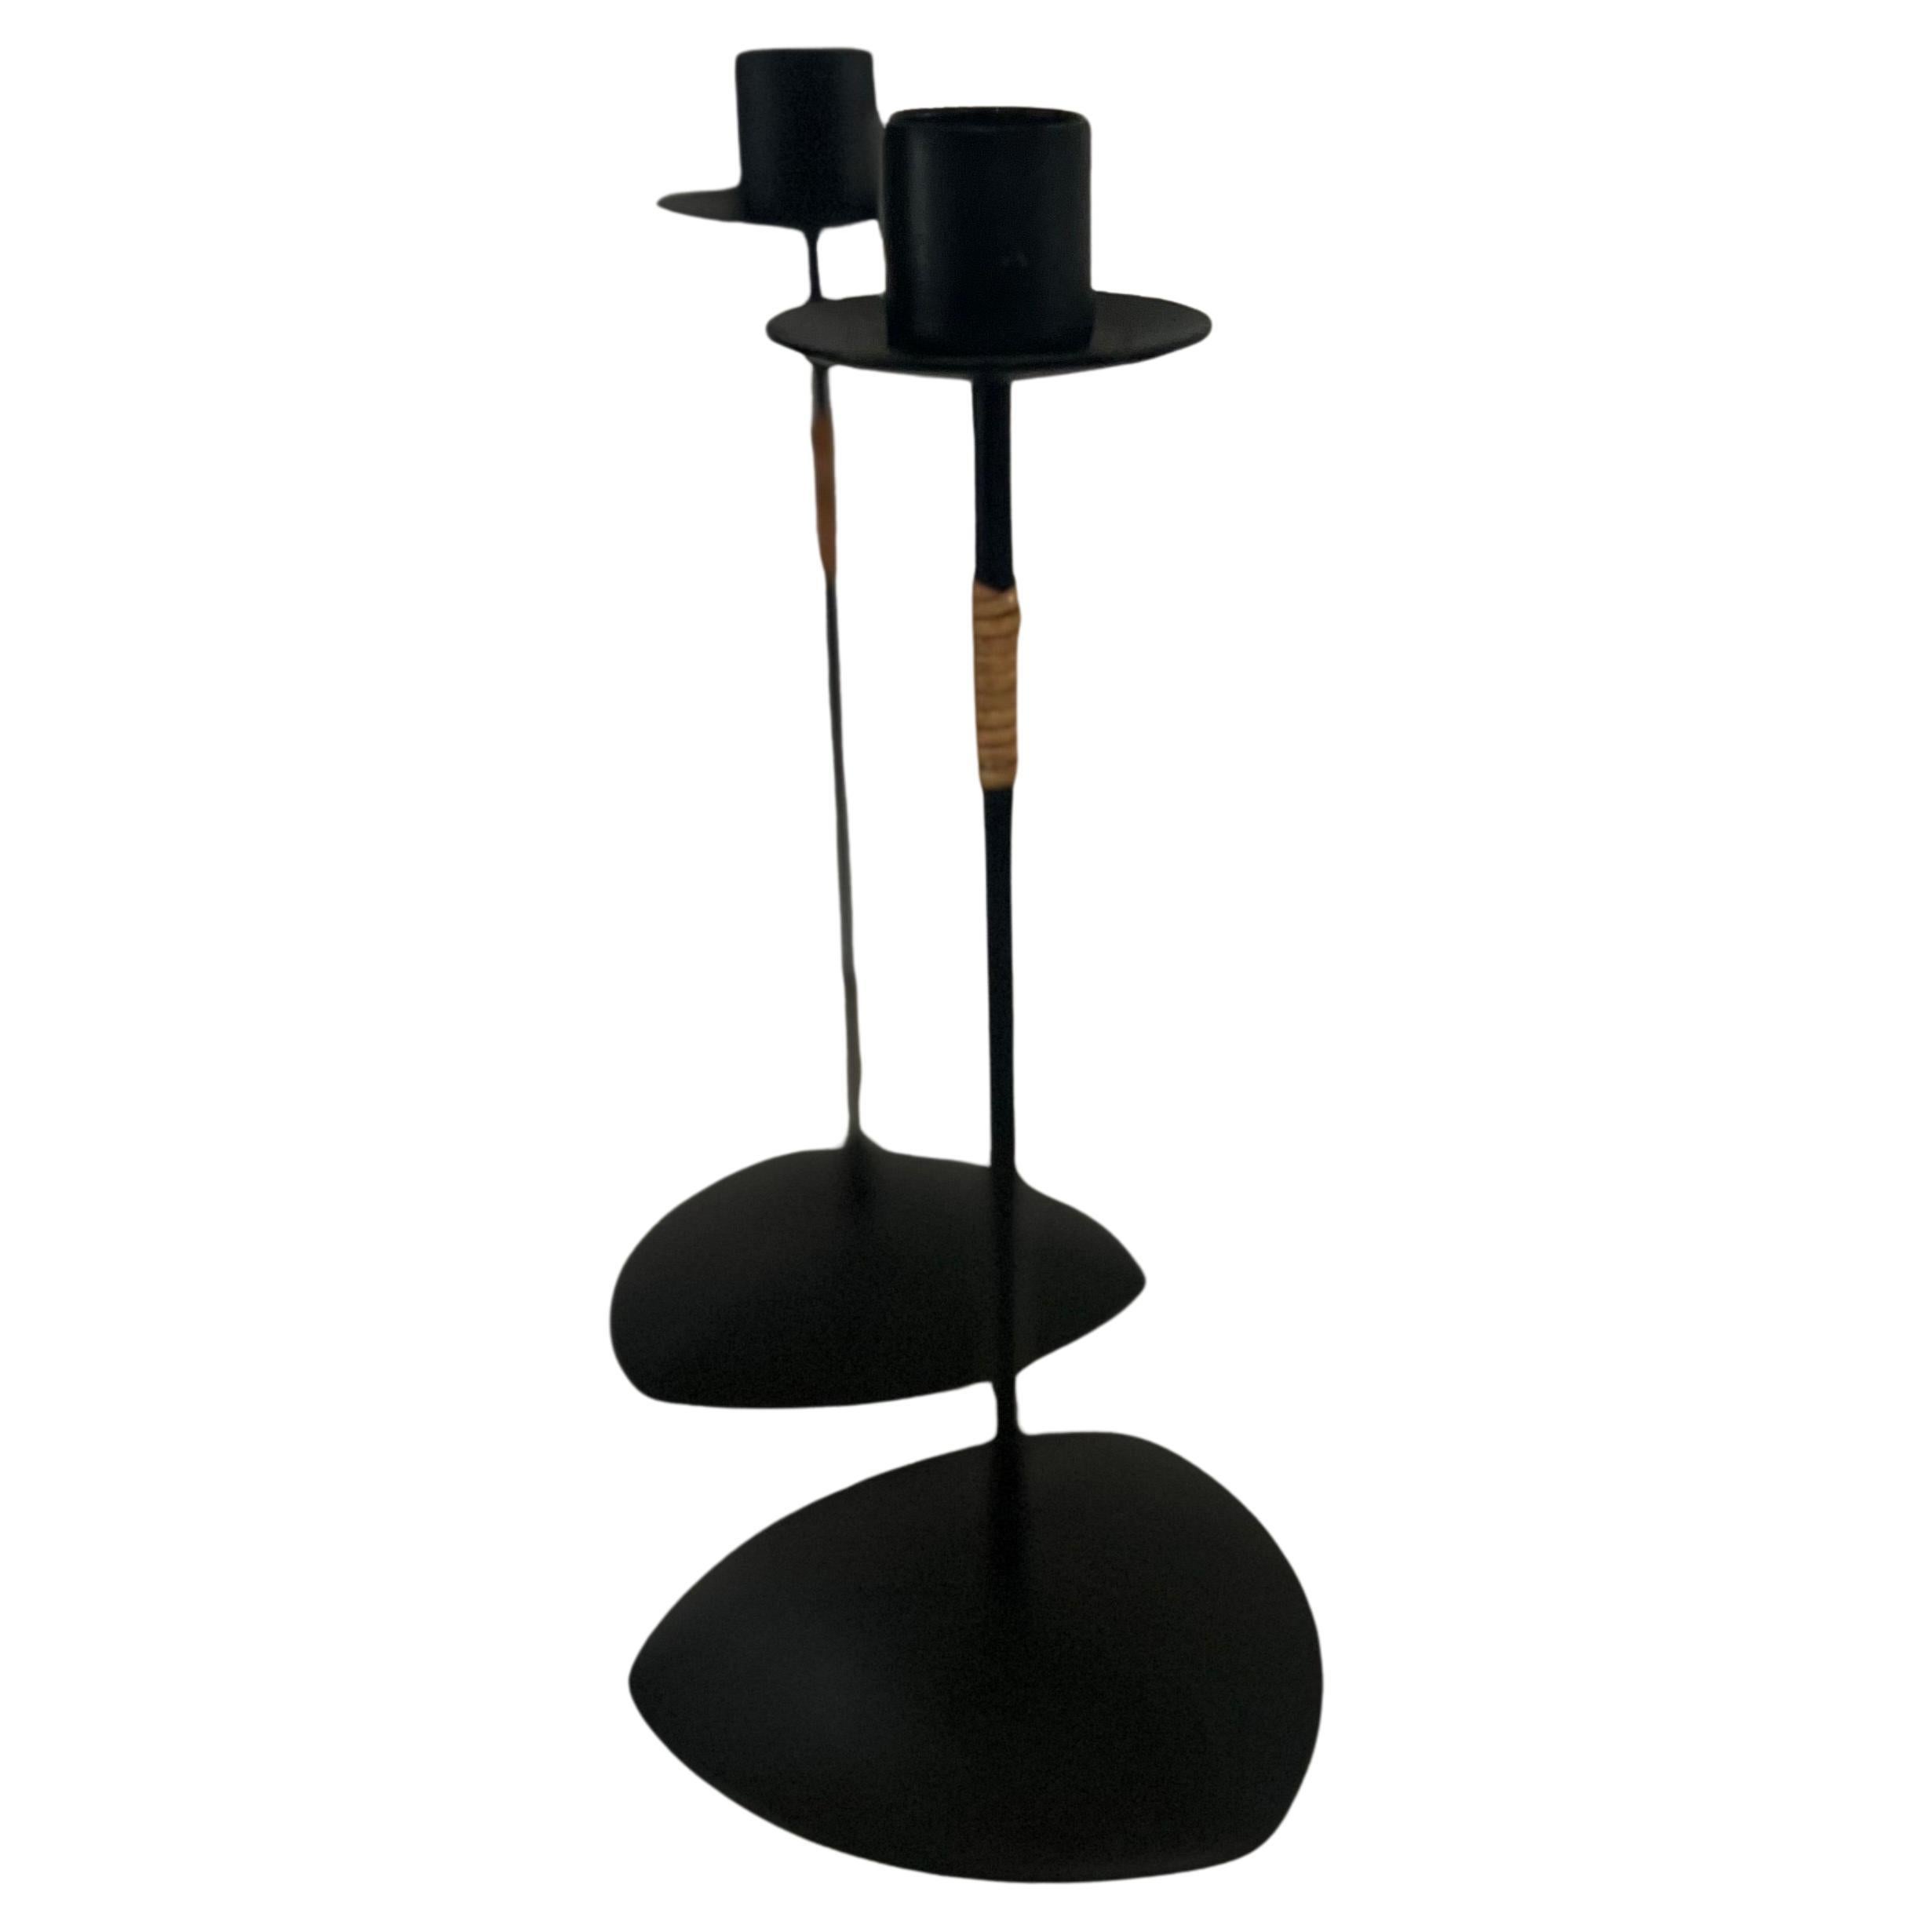 Beautiful simple elegant design by Laurids Lonborg, pair of black enameled candle holders circa 1950s with wrapped cane great condition.